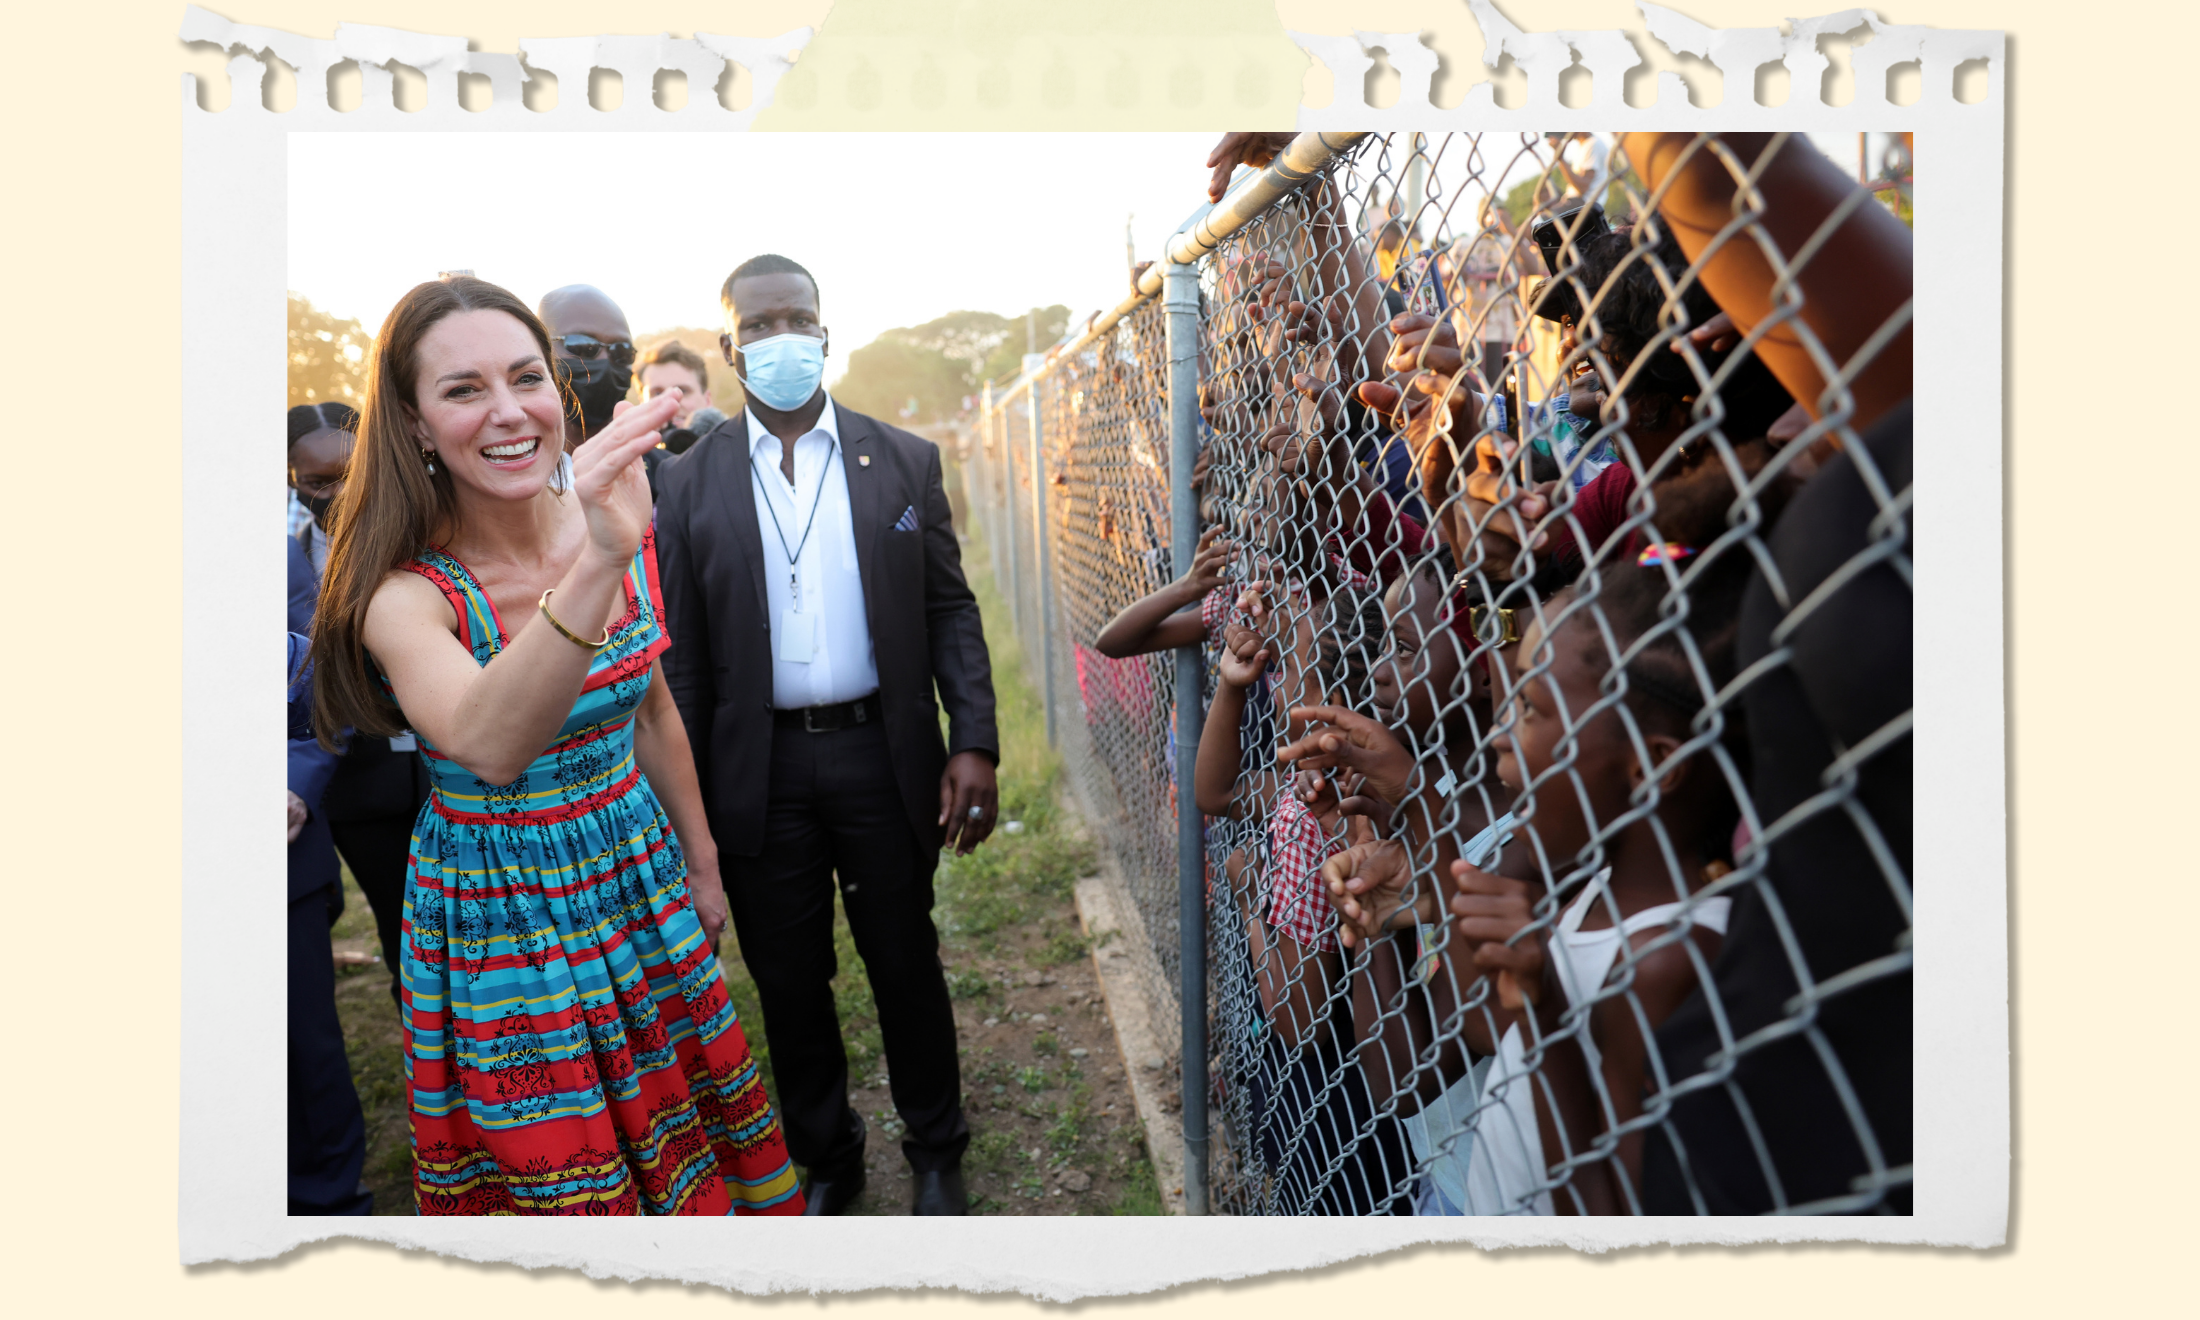 William and Kate’s Caribbean tour is no charm, all offensive